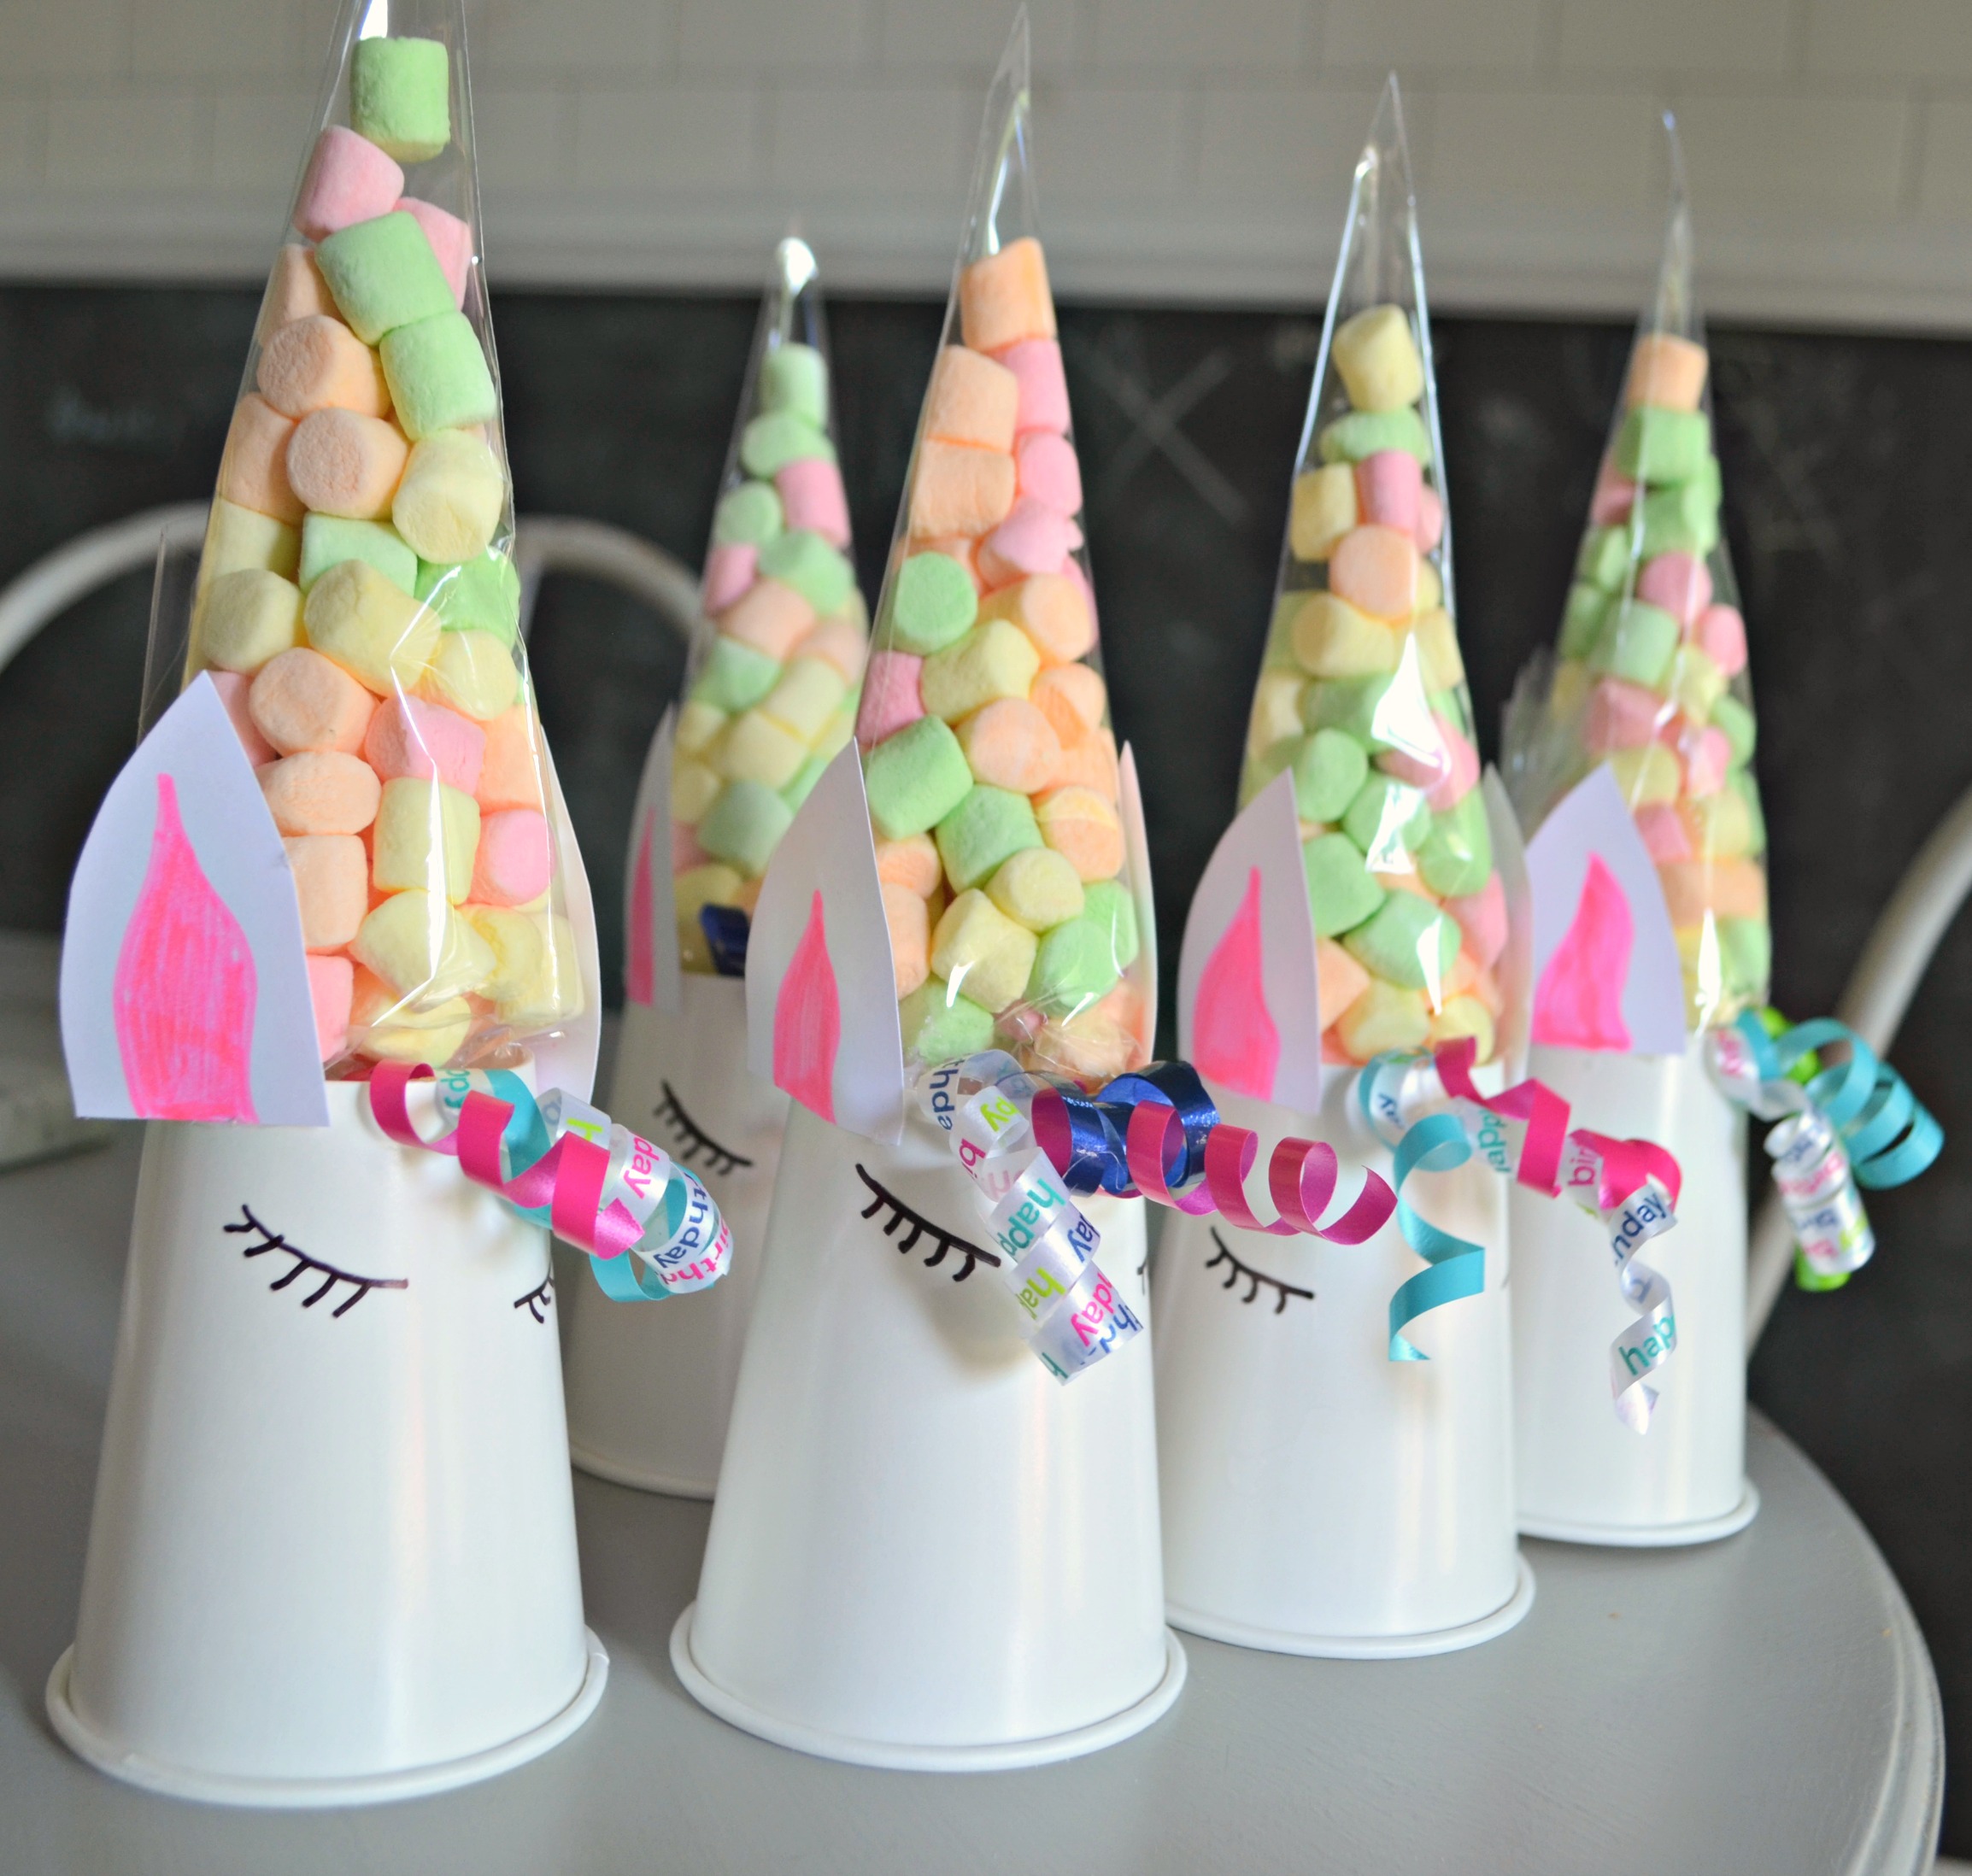 cone bags full of marshmallows on top of decorated white cups